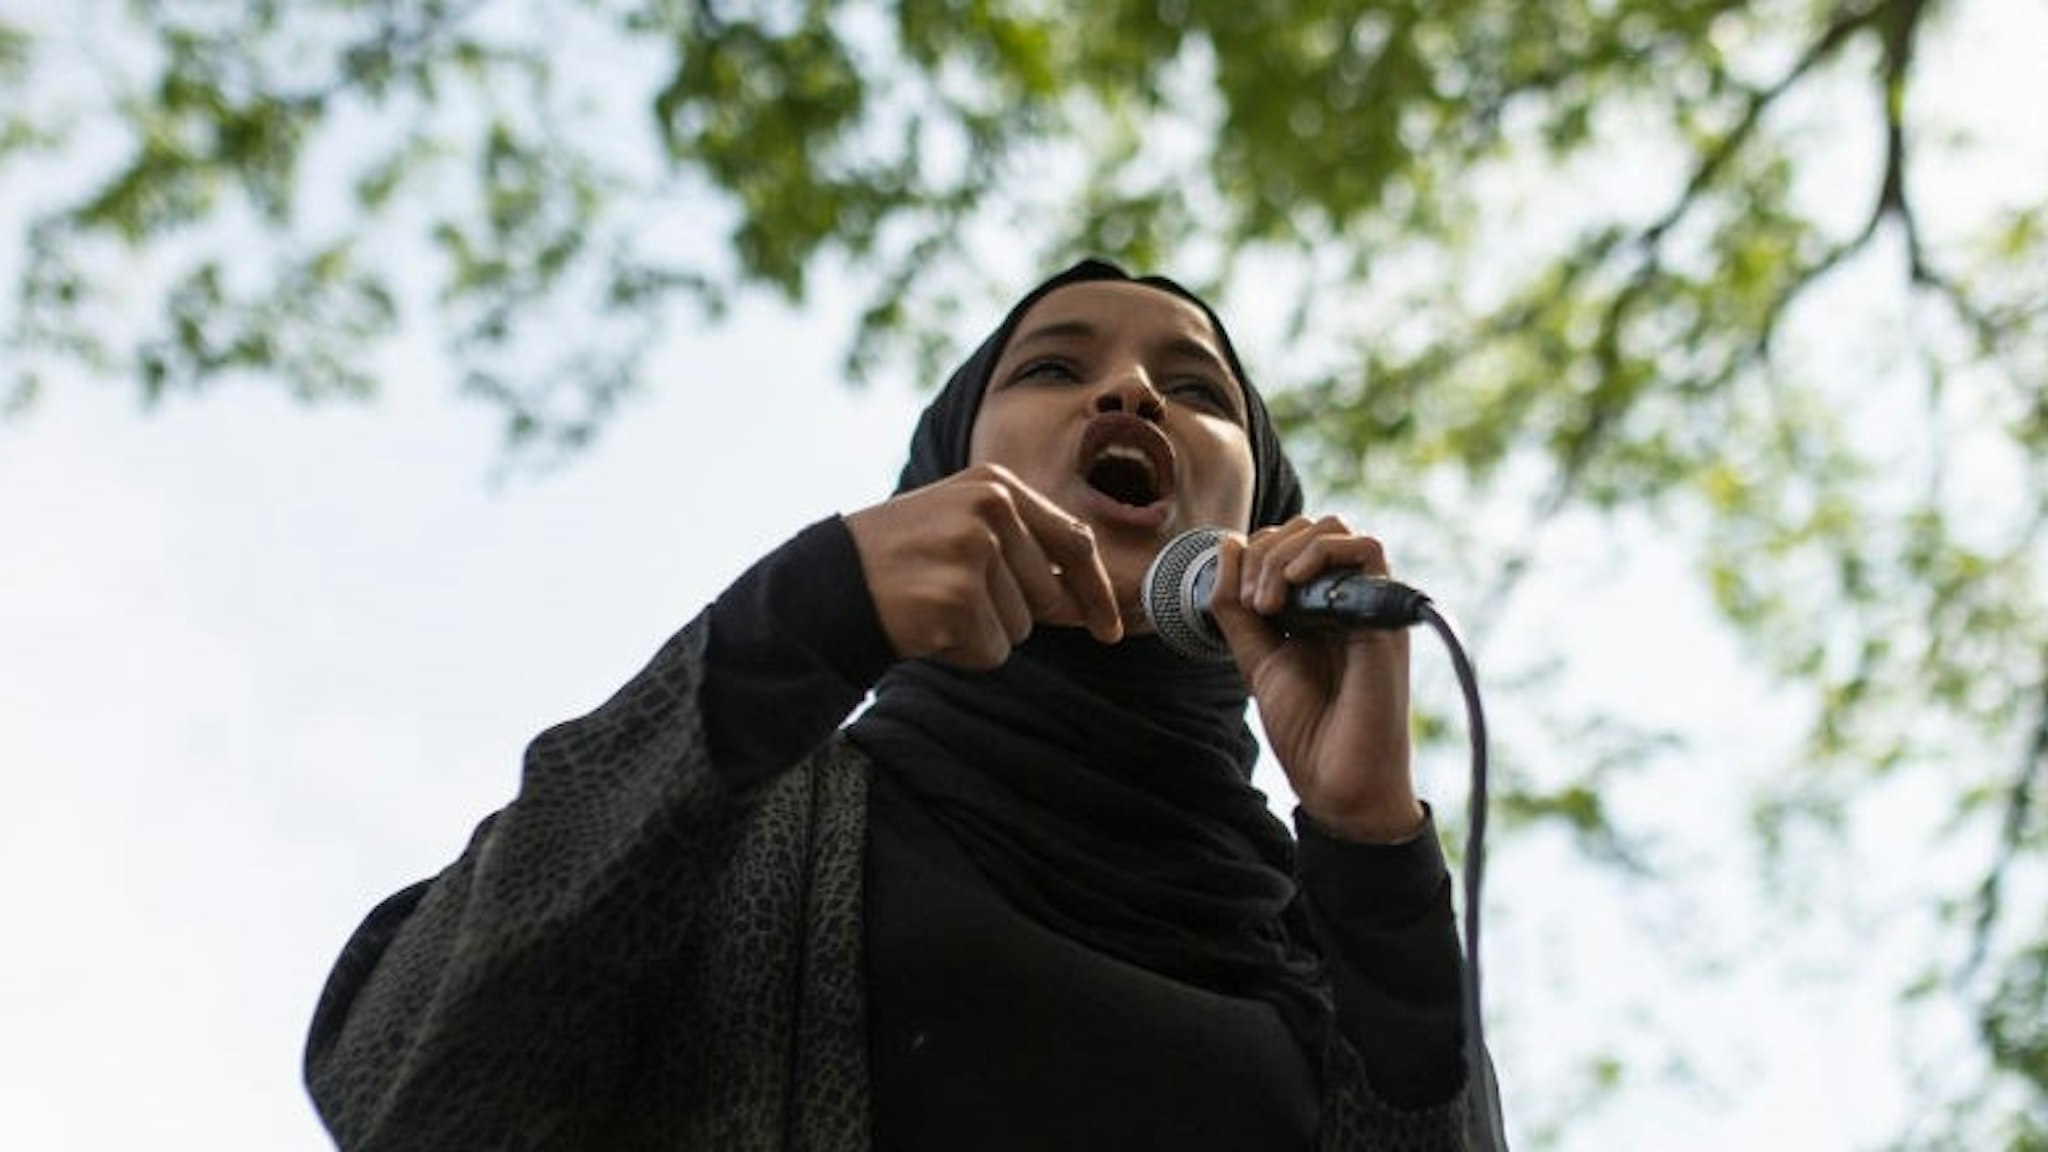 Rep. Ilhan Omar (D-MN) speaks to a crowd gathered for a march to defund the Minneapolis Police Department on June 6, 2020 in Minneapolis, Minnesota. The march commemorated the life of George Floyd who was killed by members of the MPD on May 25. (Photo by